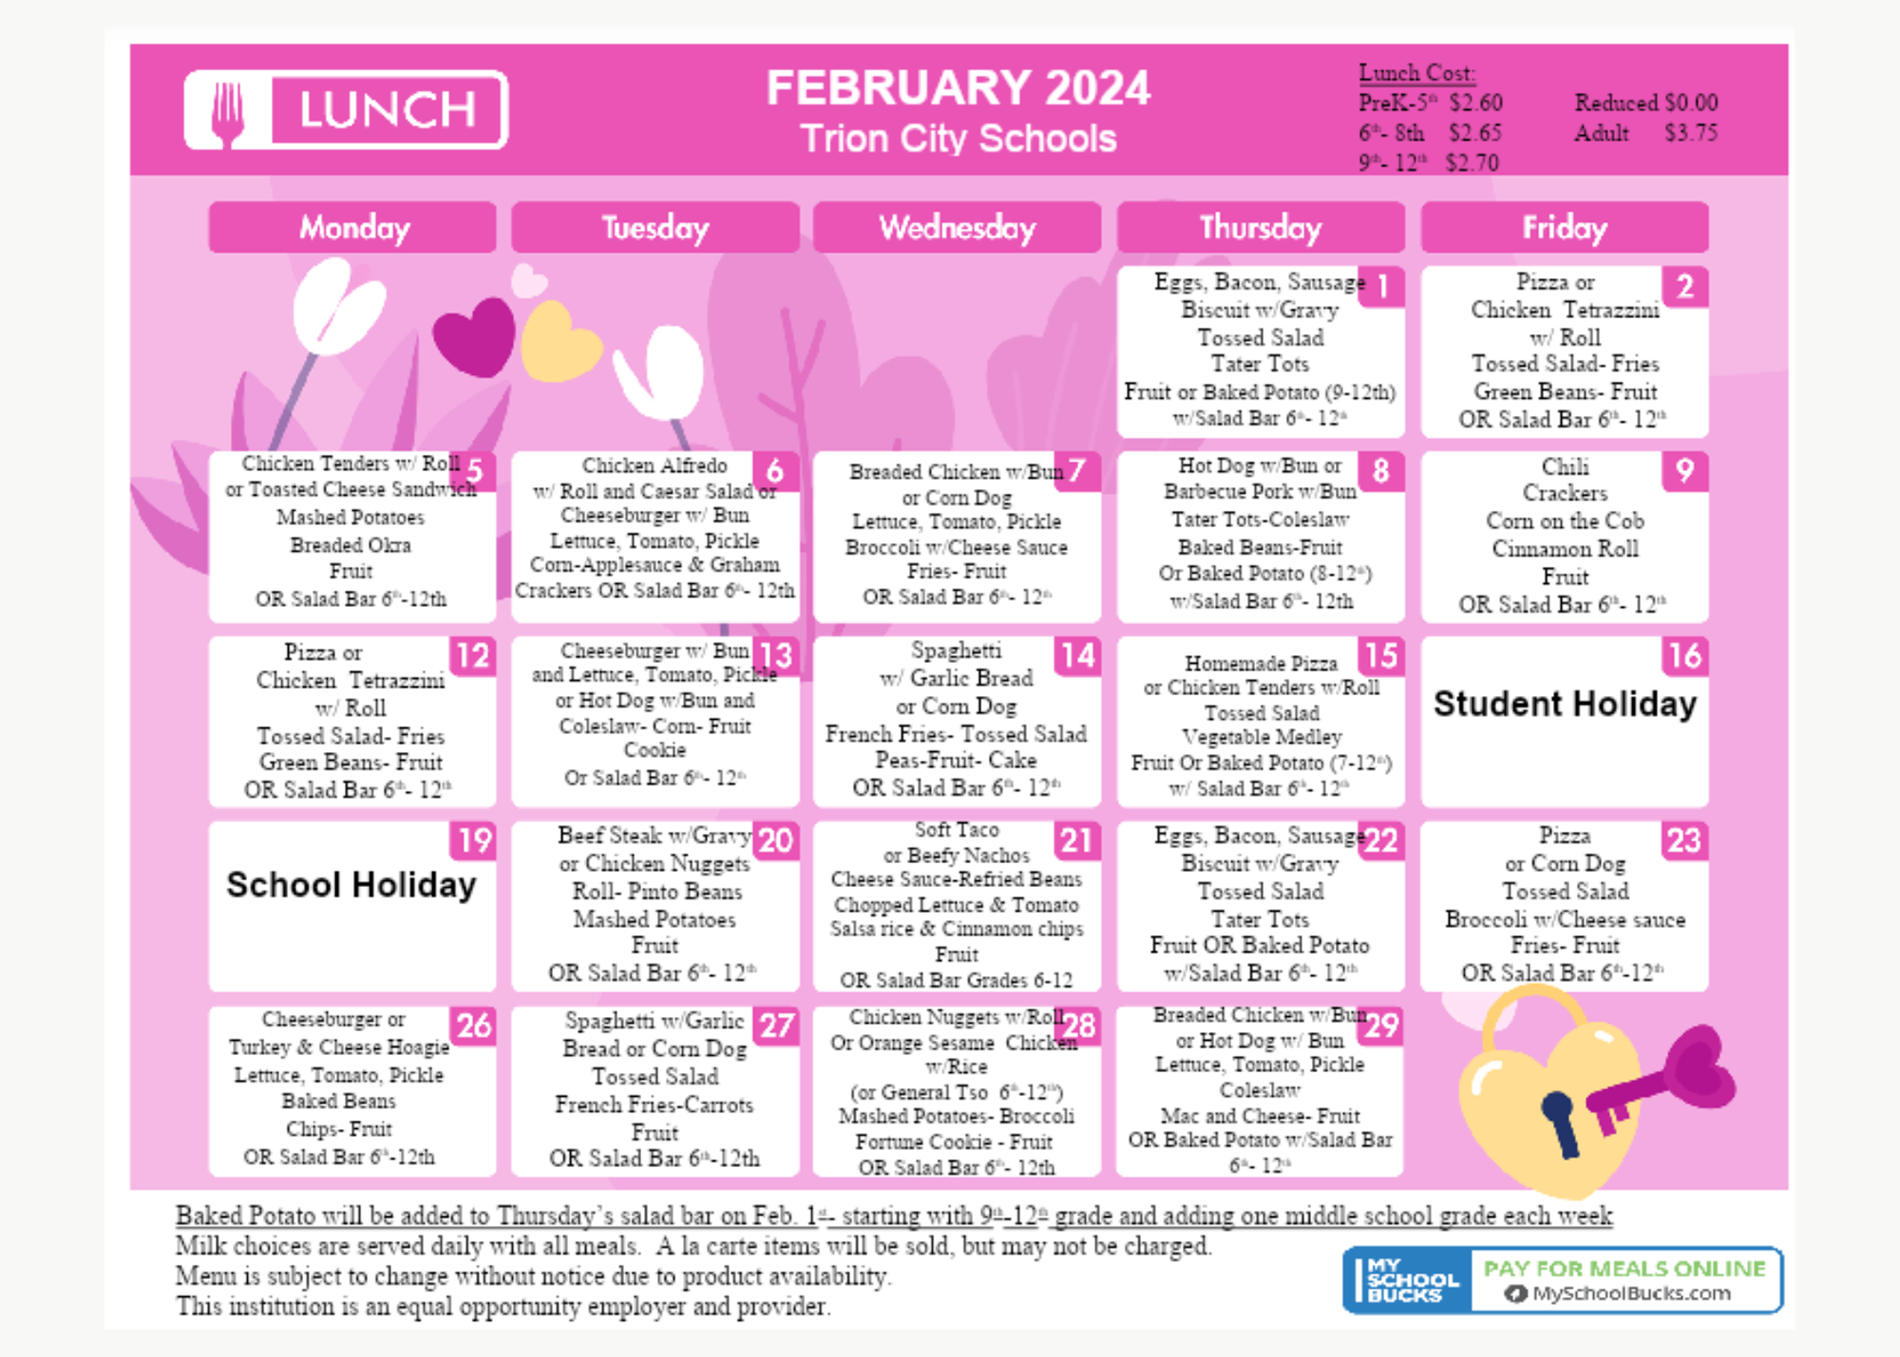 TCS LUNCH MENU: CLICK TO ACCESS READABLE TEXT